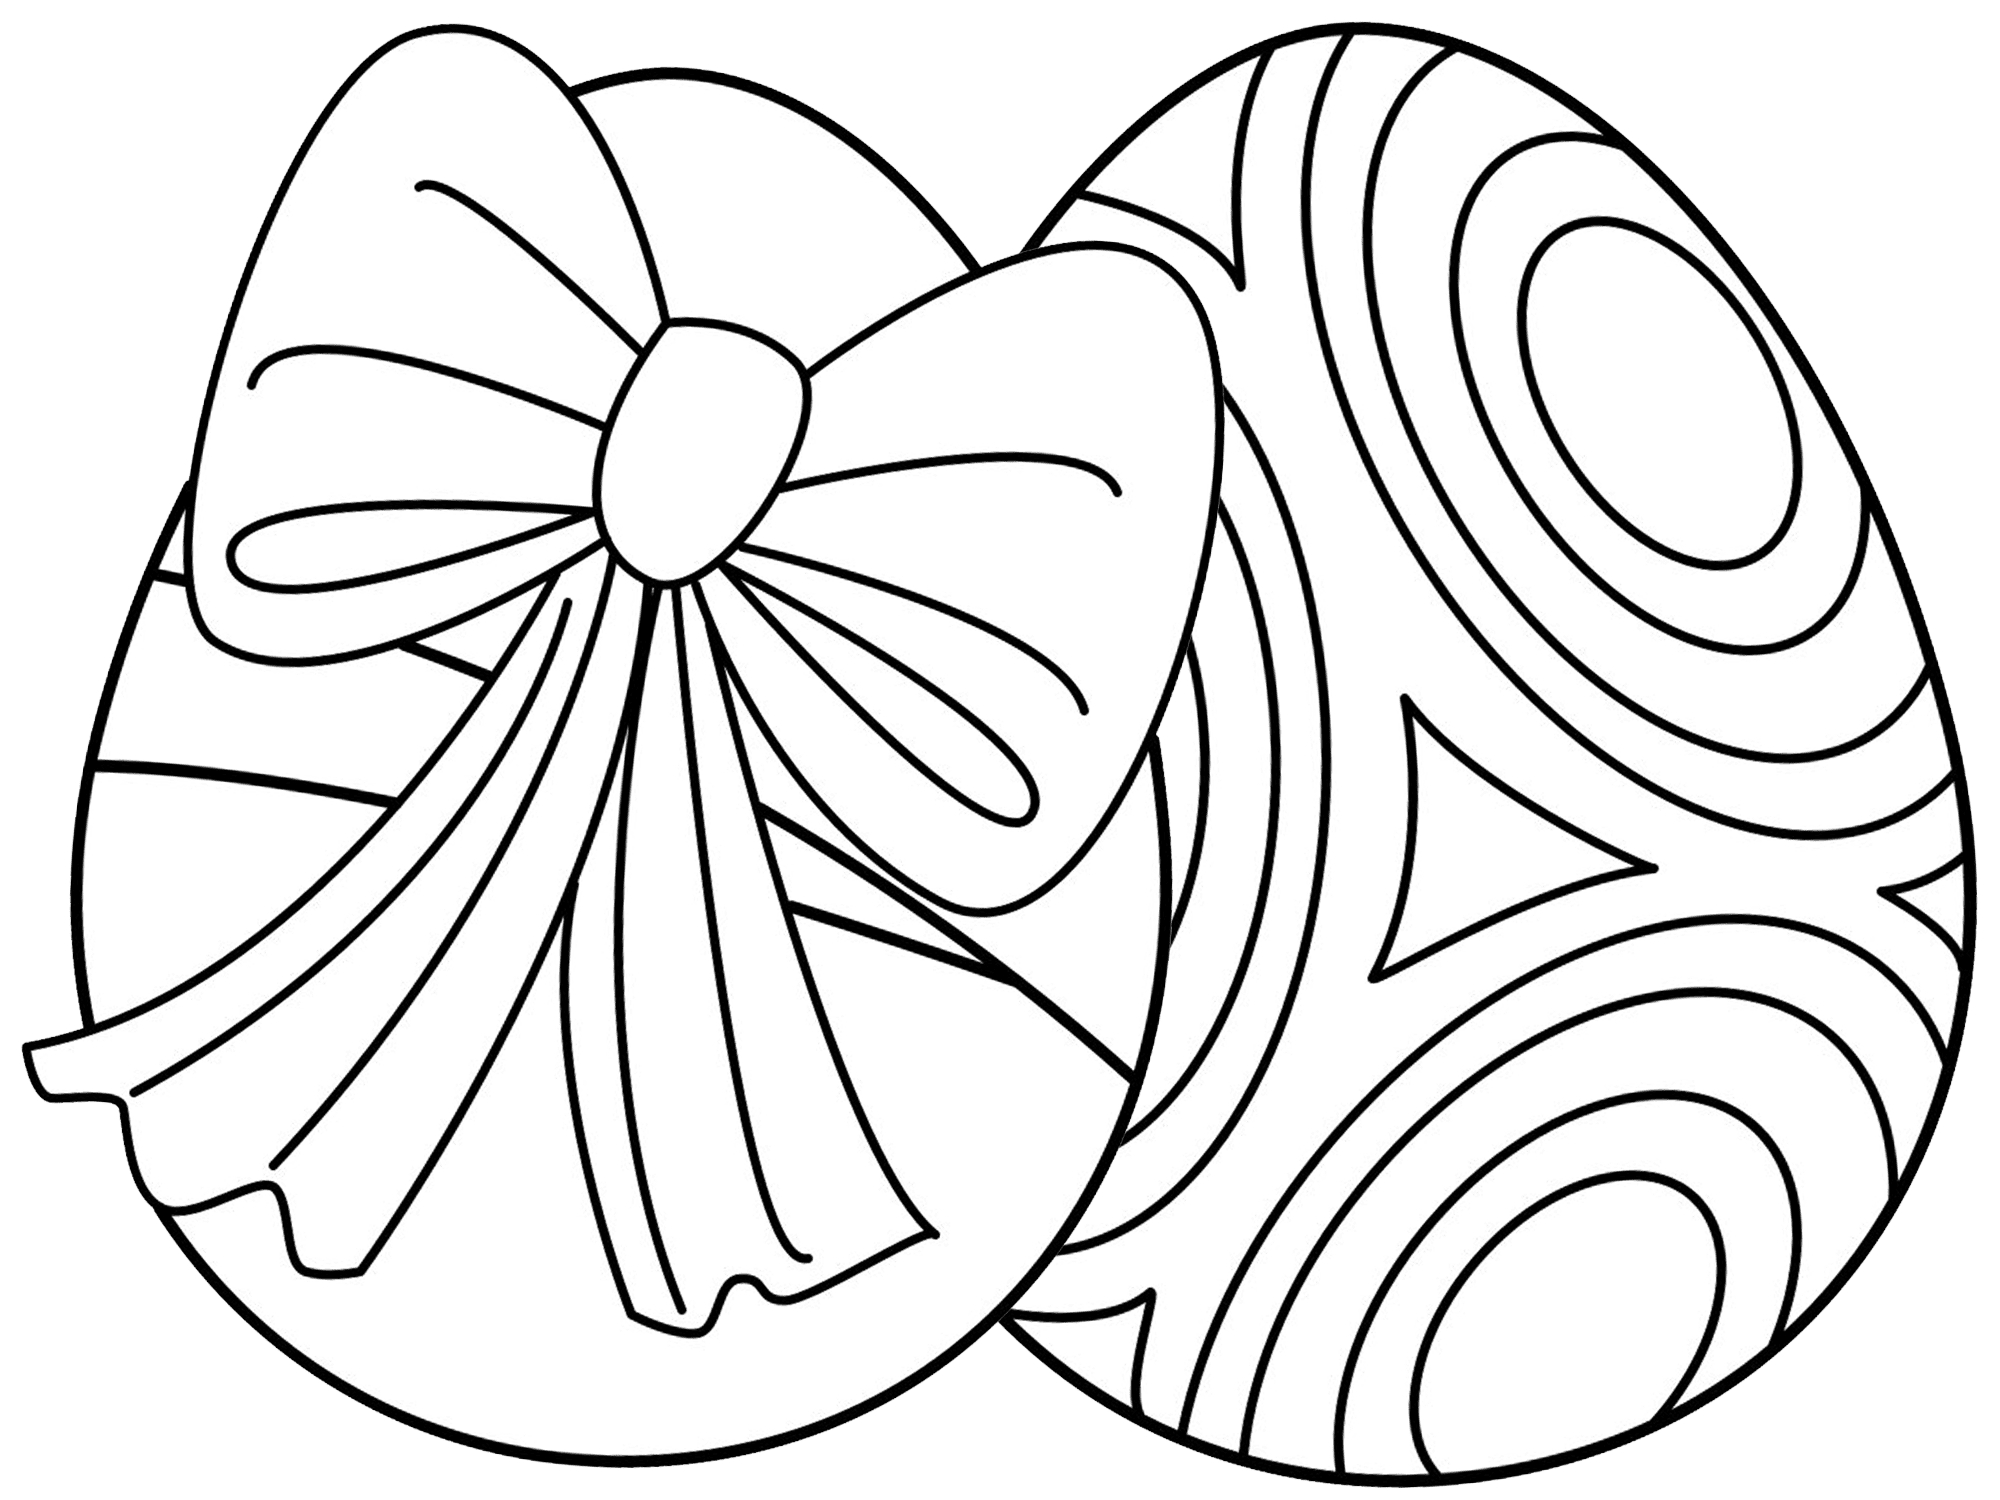 7 Places For Free, Printable Easter Egg Coloring Pages - Free Printable Easter Stuff